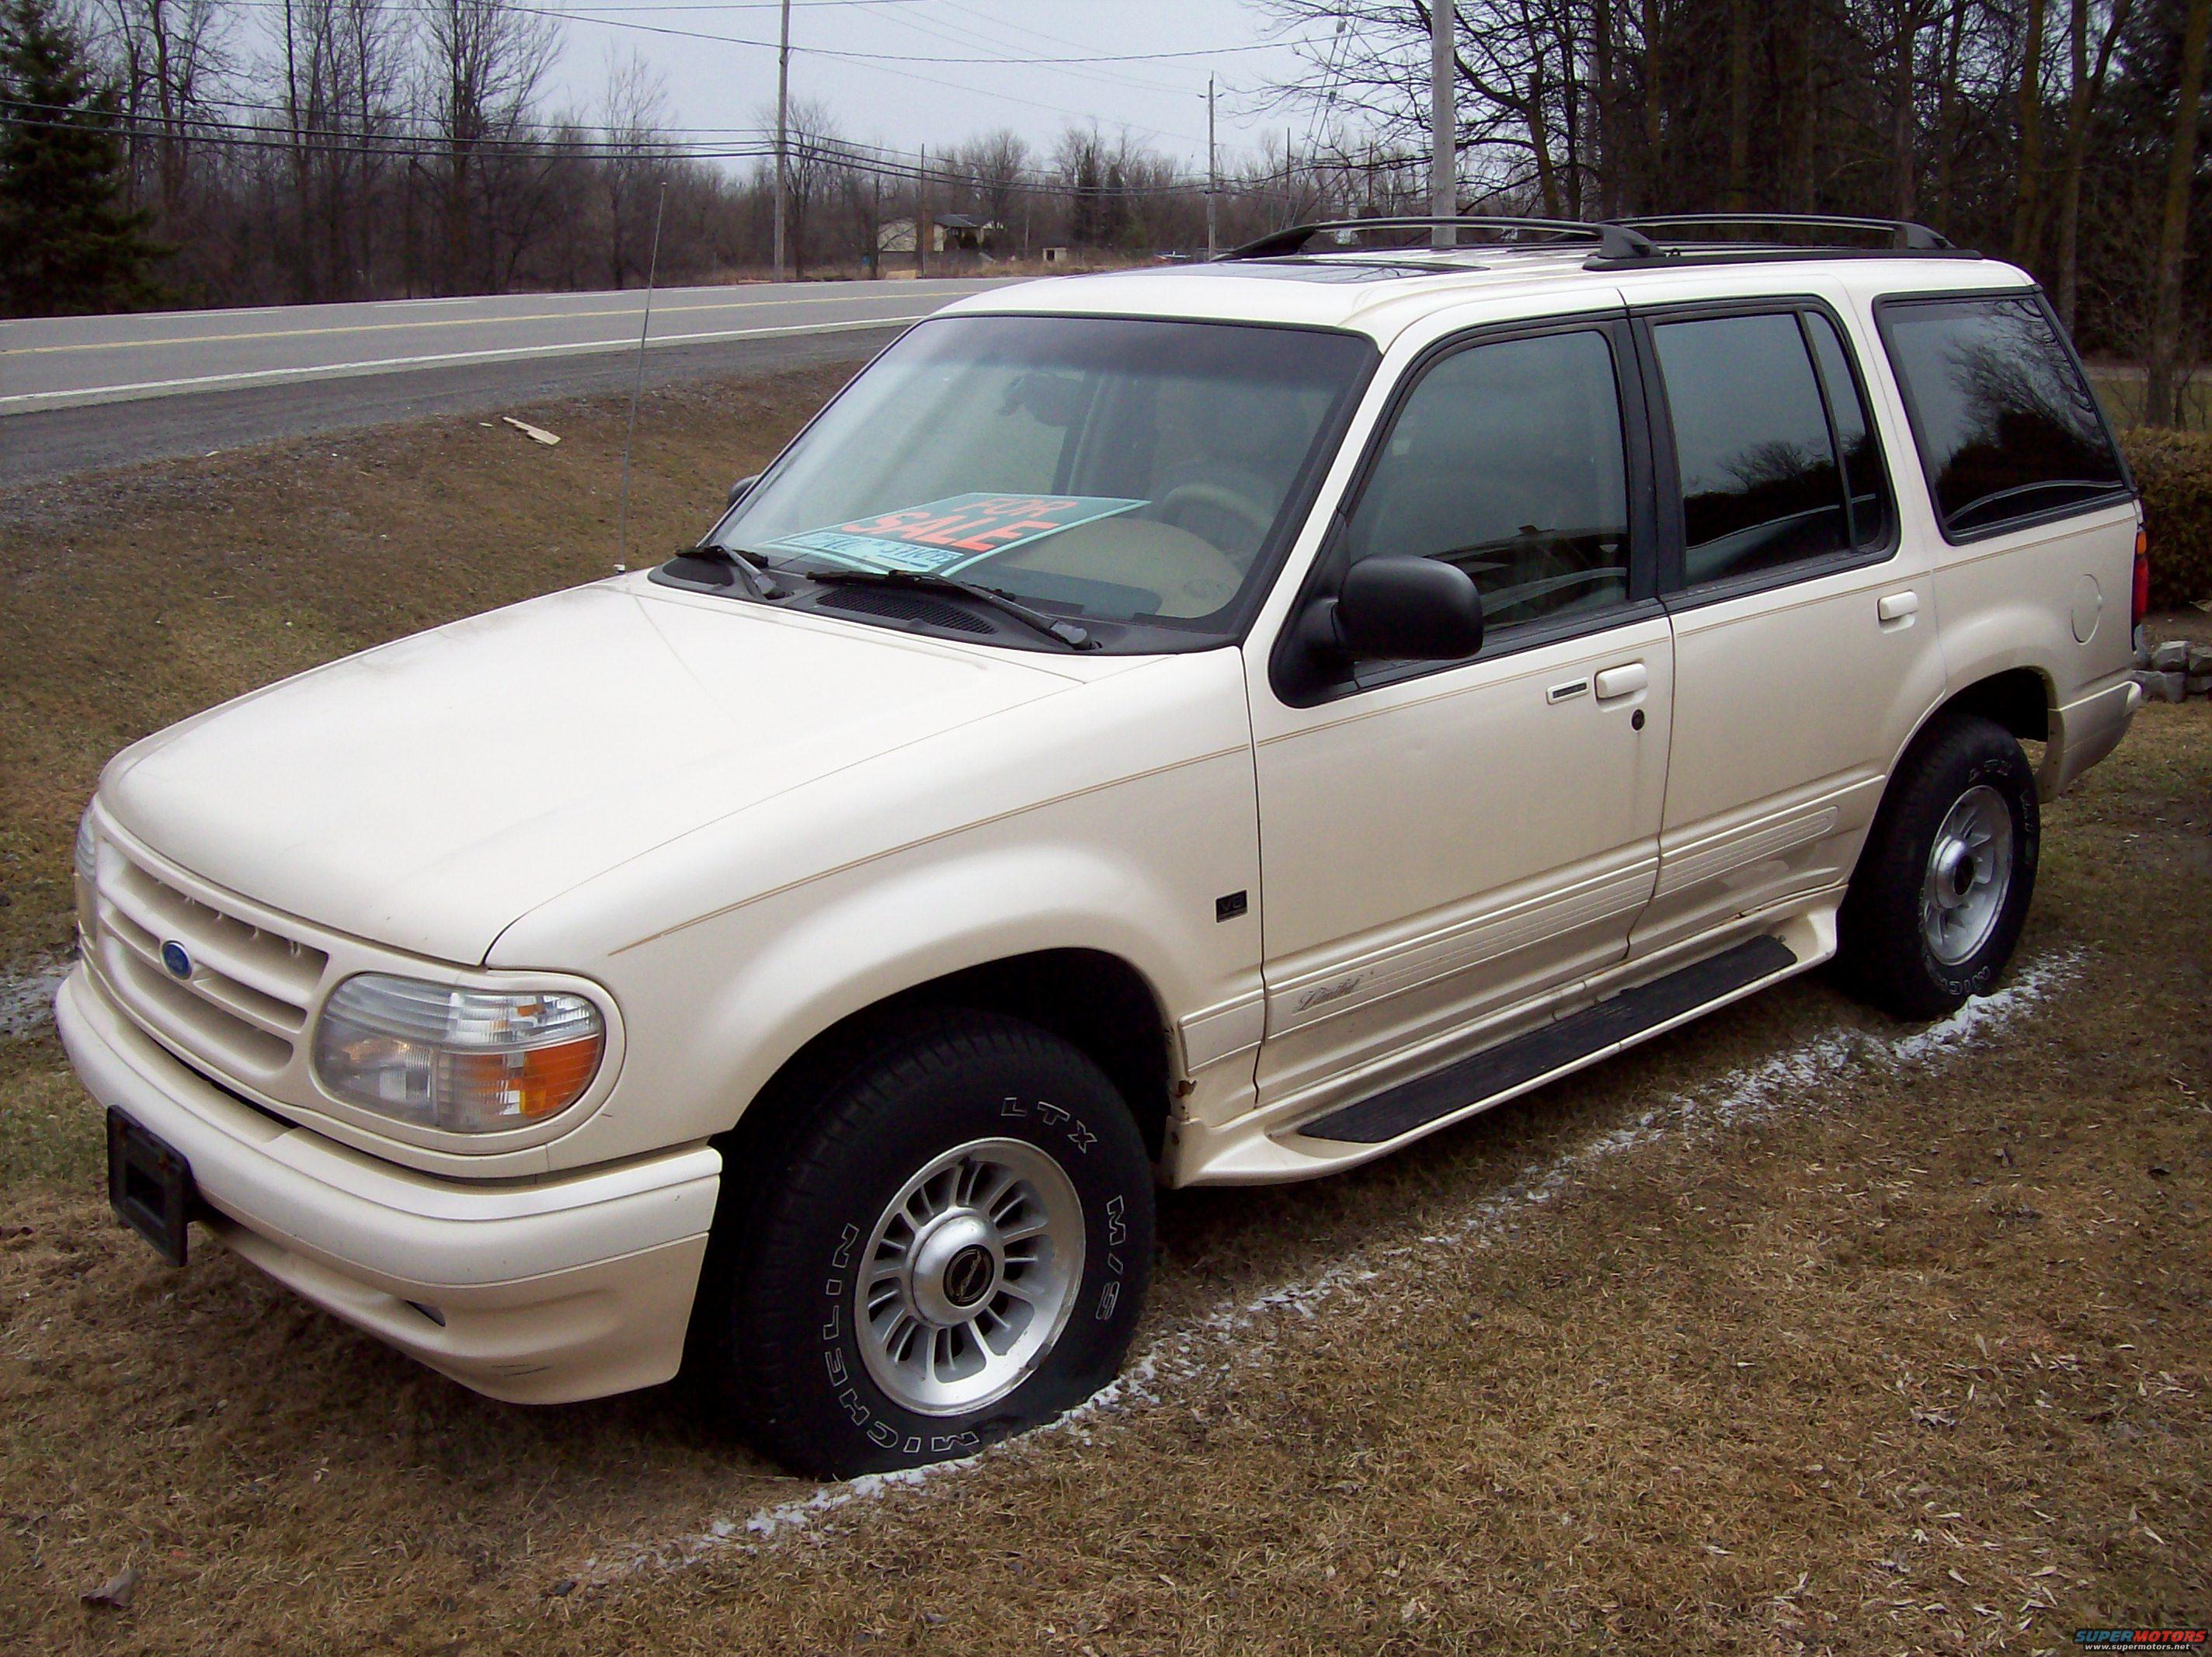 1996 Ford explorer limited edition #8